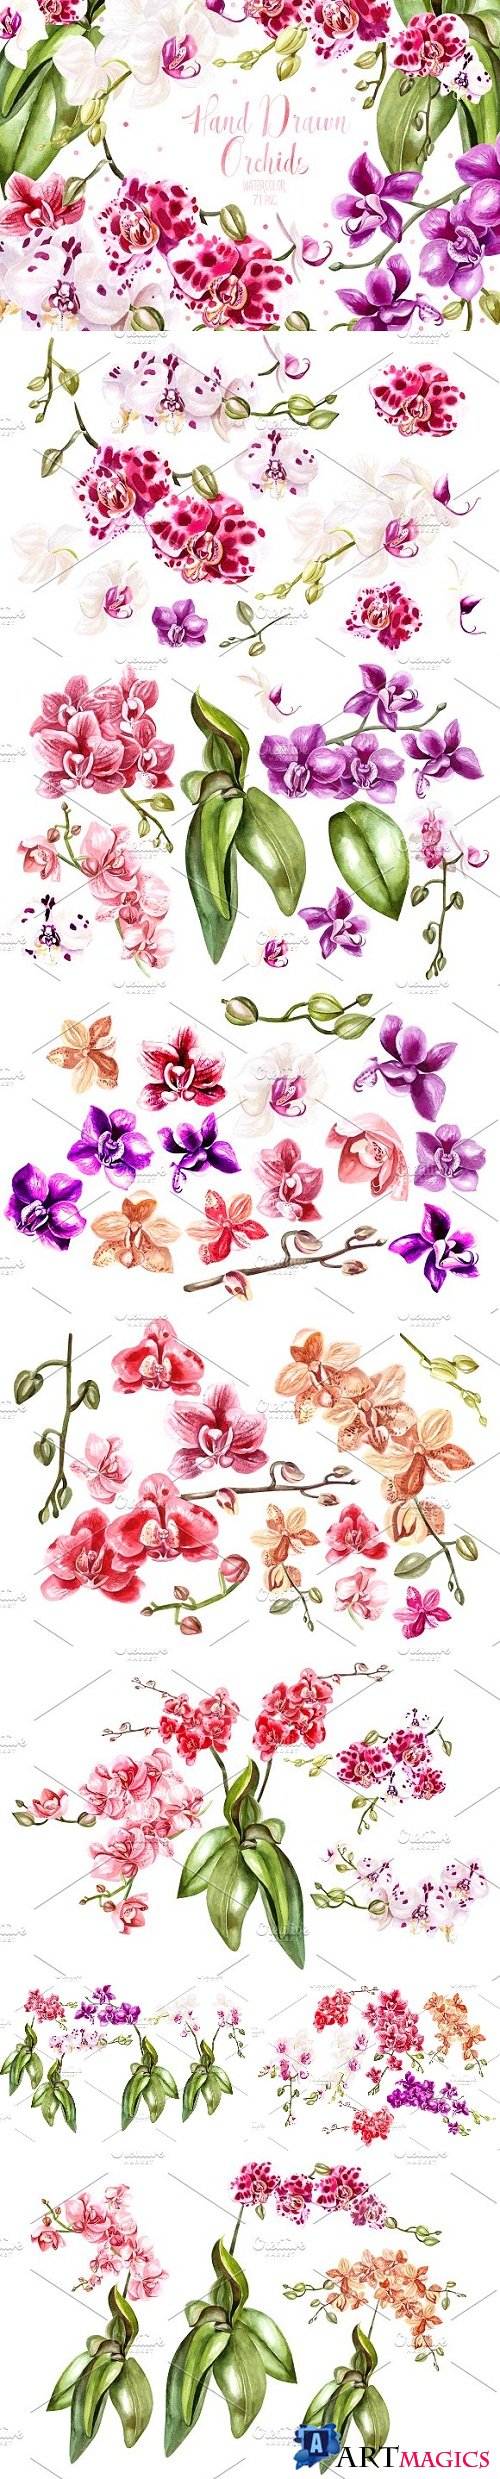 Hand Drawn Watercolor Orchids 2 2360685